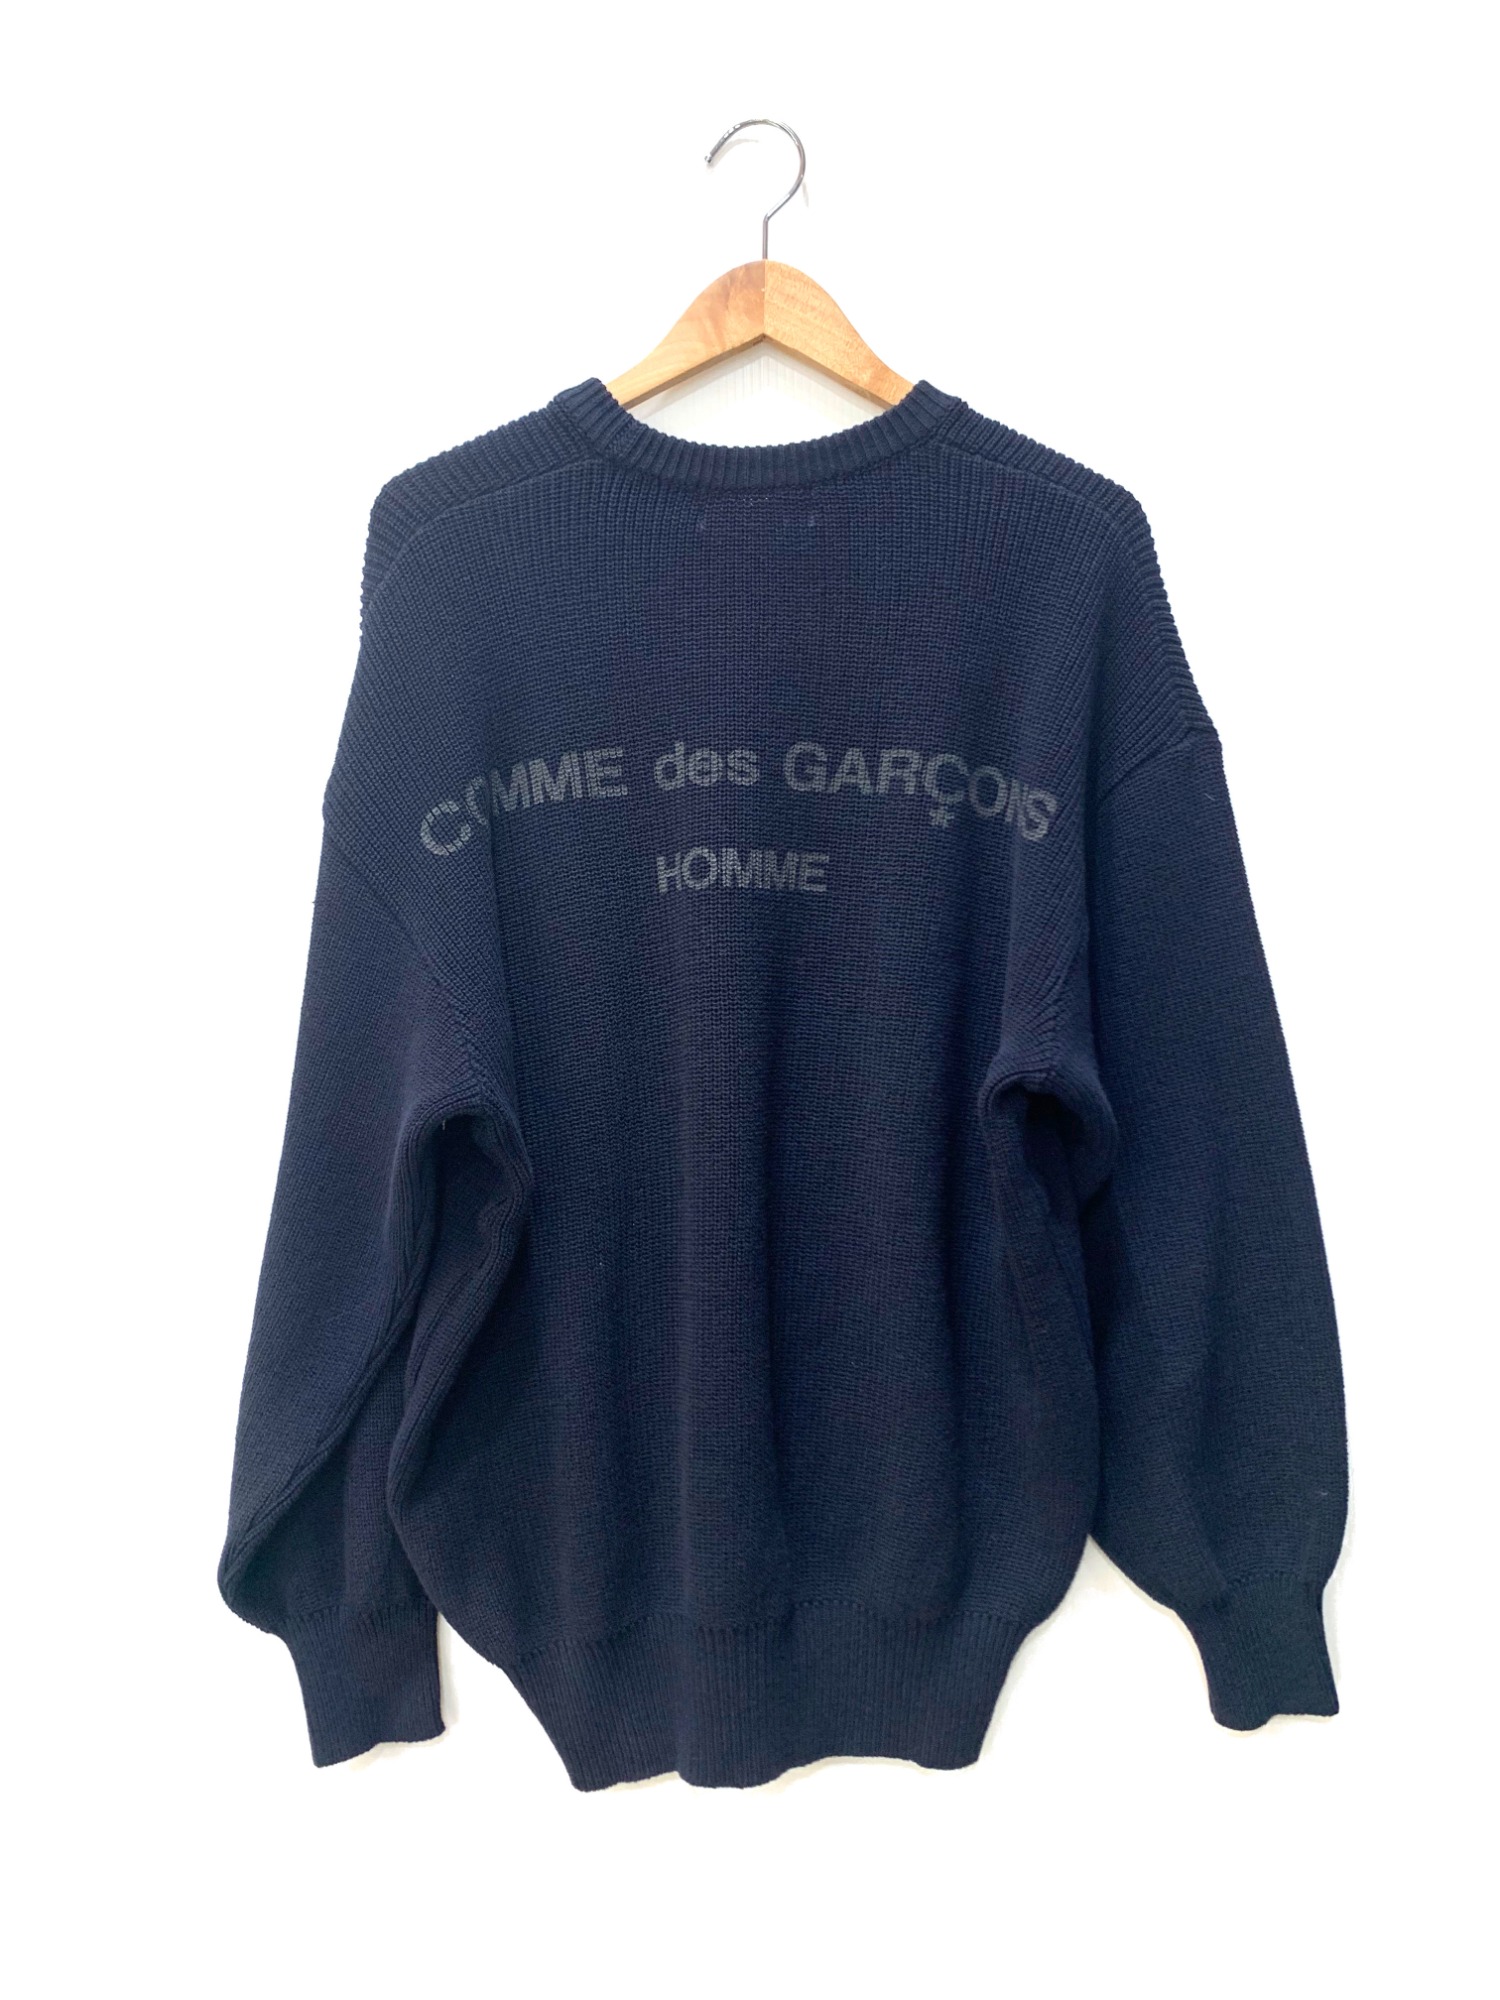 COMME des GARCONS HOMME】80'sアーカイブニットアイテム買取入荷 ...